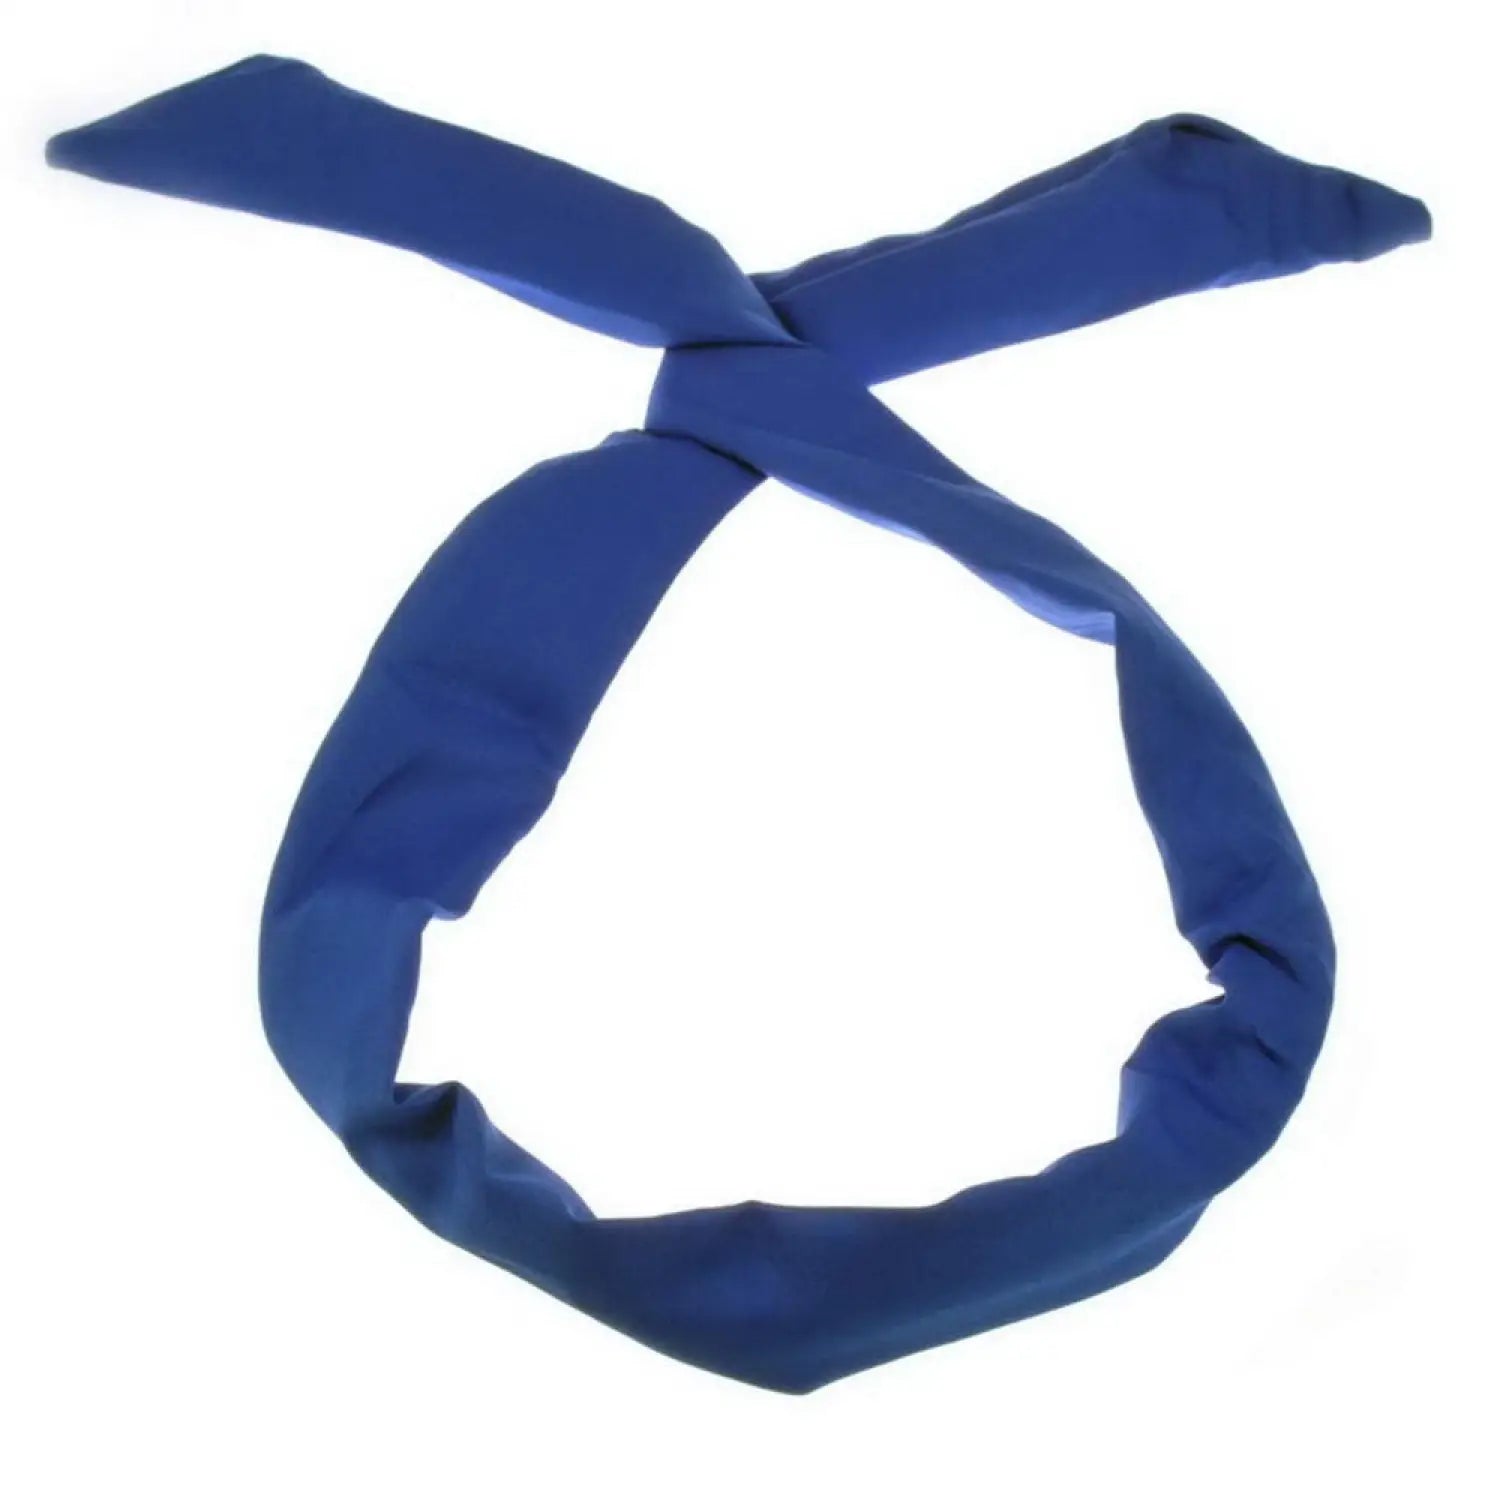 Blue satin wired bunny ears headband on white background